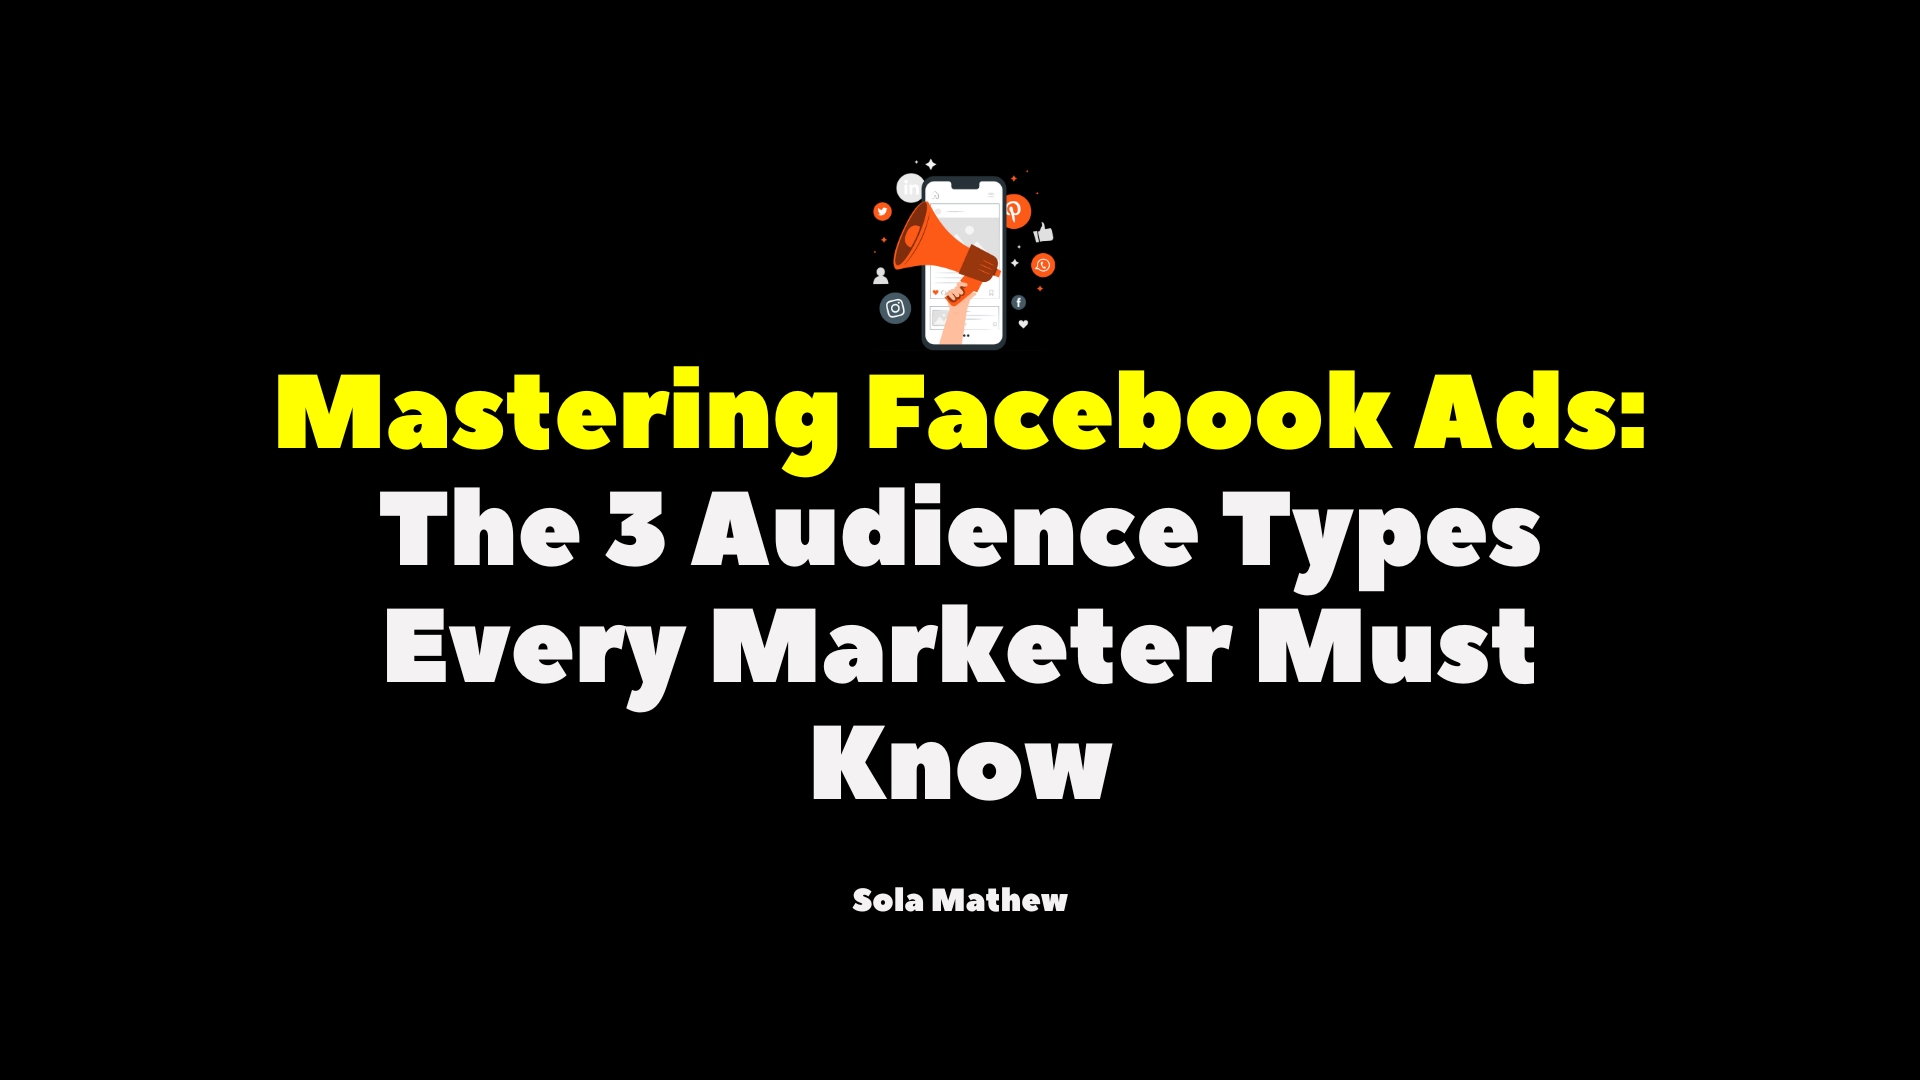 Mastering Facebook Ads: The 3 Audience Types Every Marketer Must Know by Sola Mathew